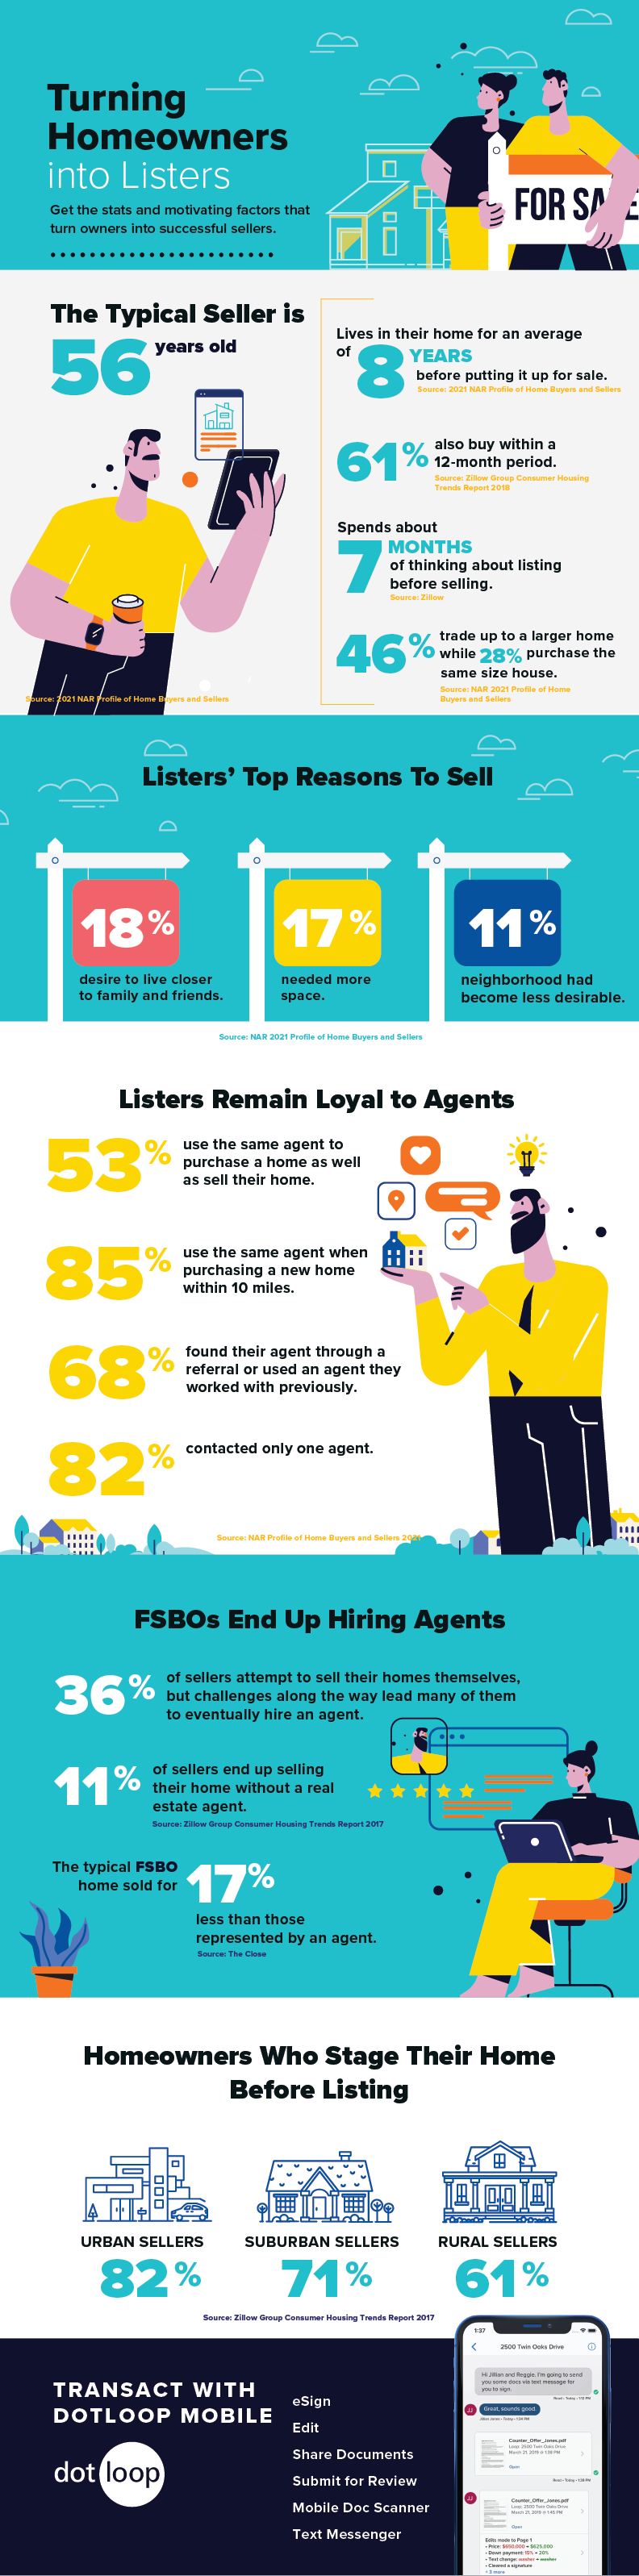 Real Estate Infographic on Turning Homeowners into Listers